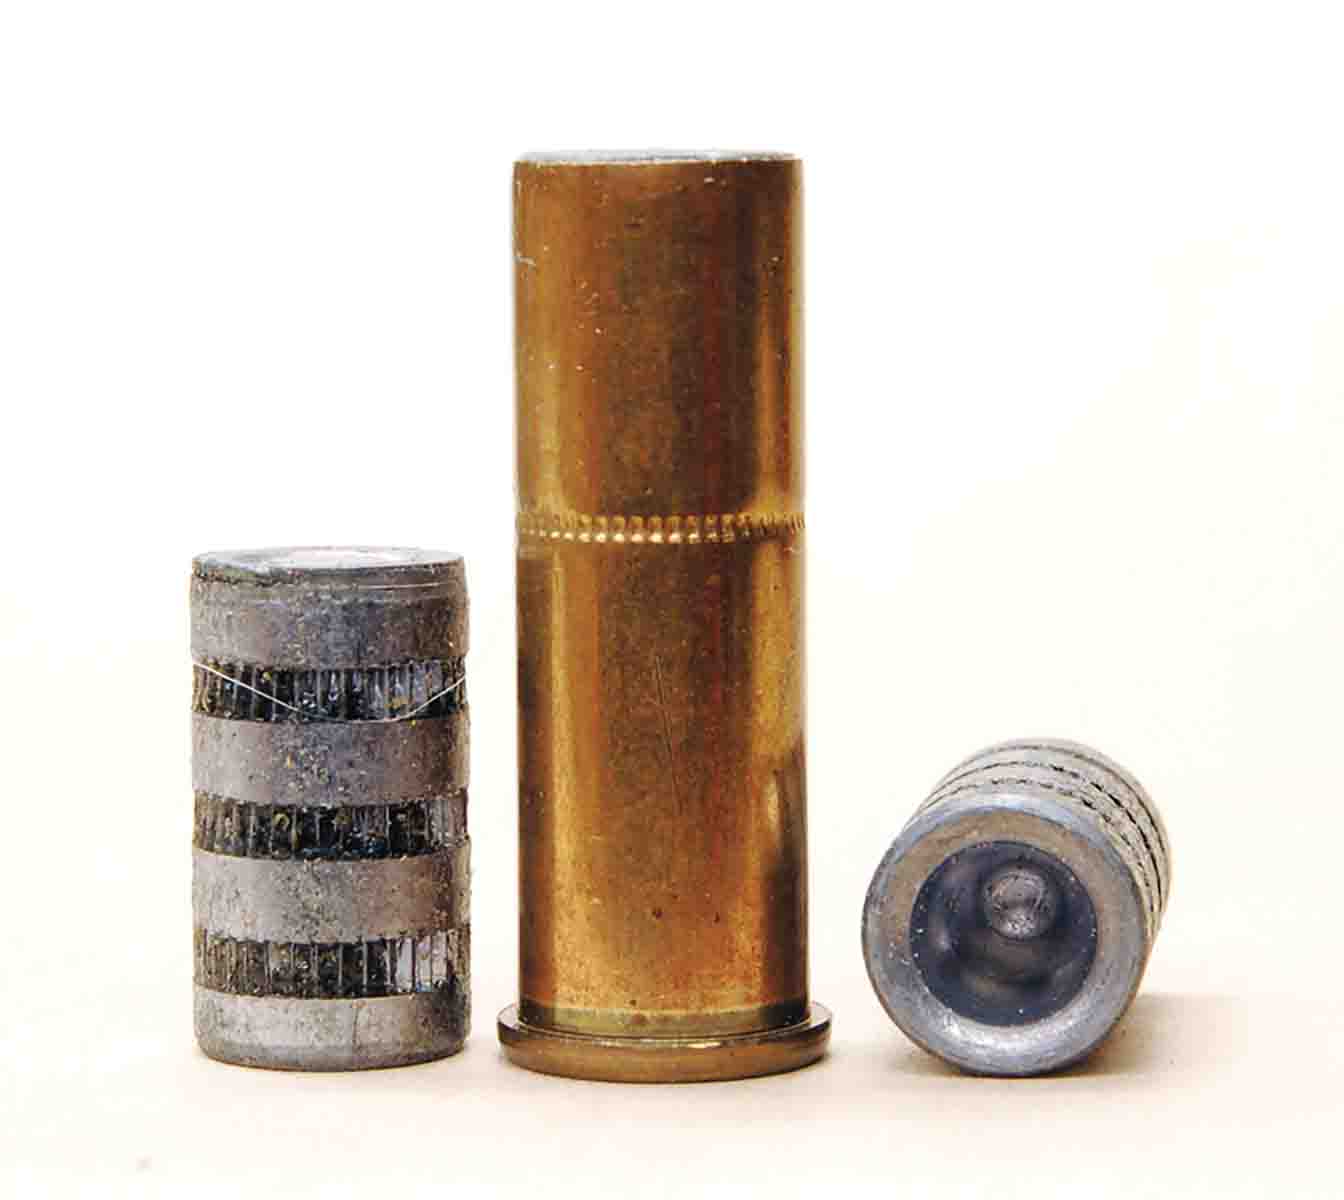 Today’s only factory target wadcutter round features a 148-grain, hollowbase, flush-seated bullet like these from Speer.